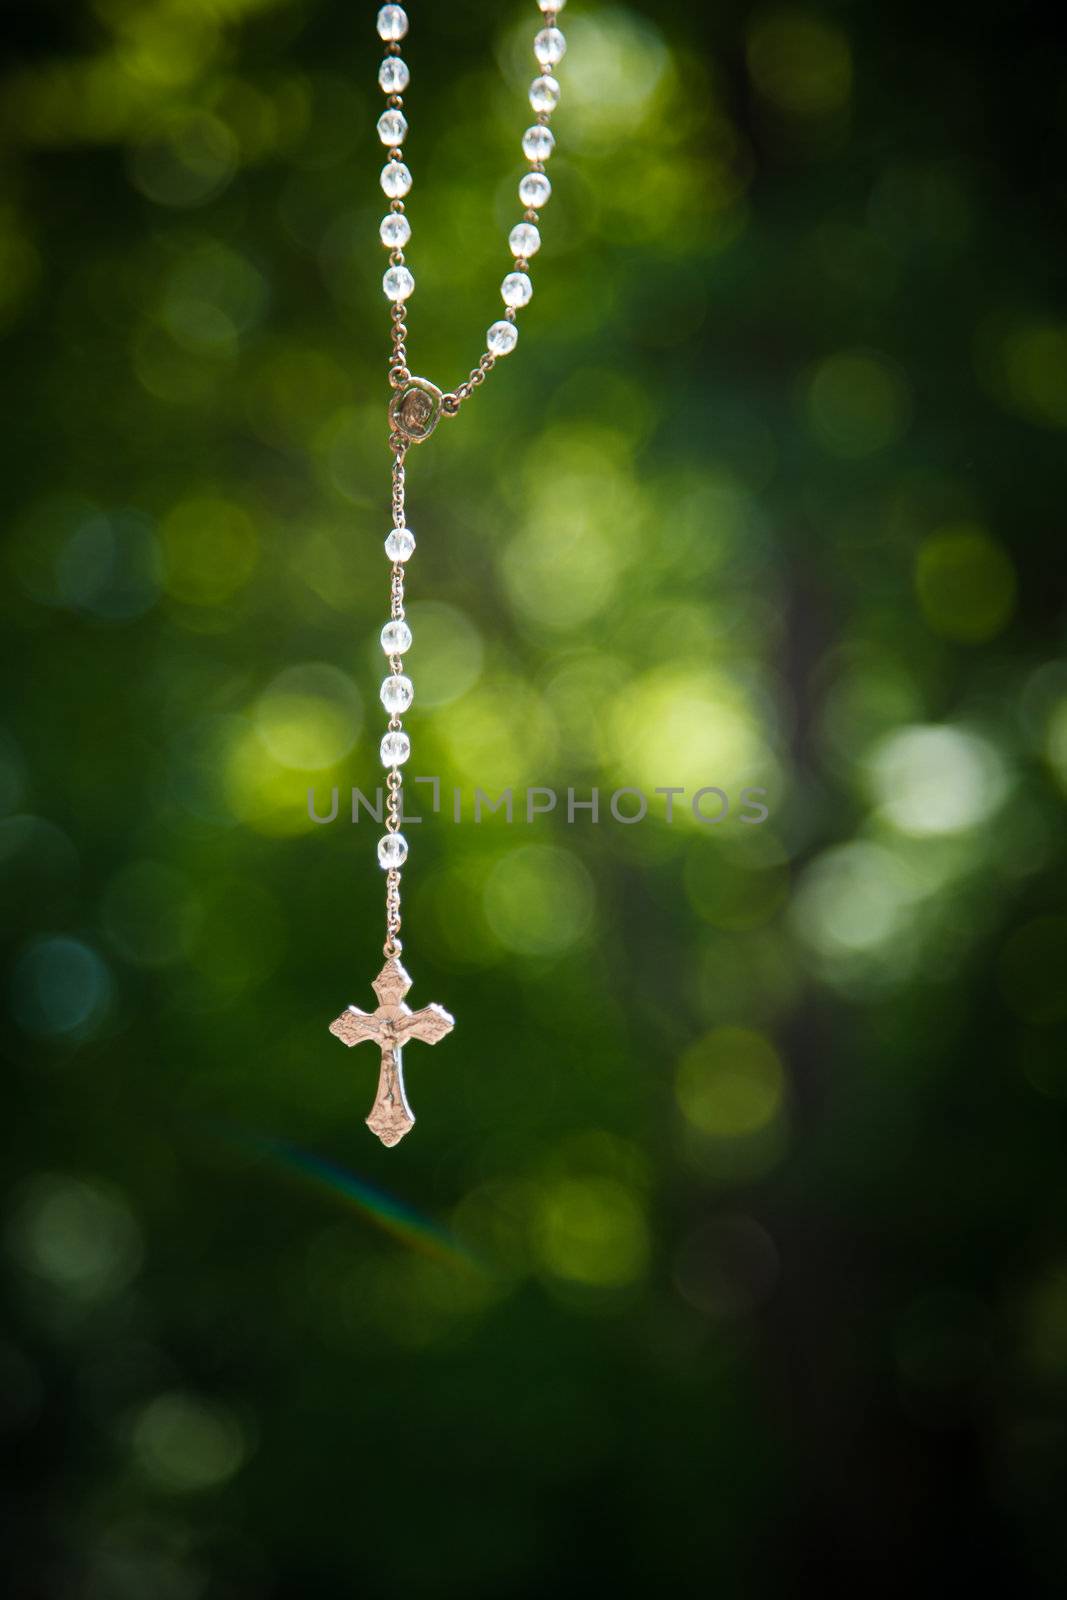 Crucifix hanged outside by Talanis